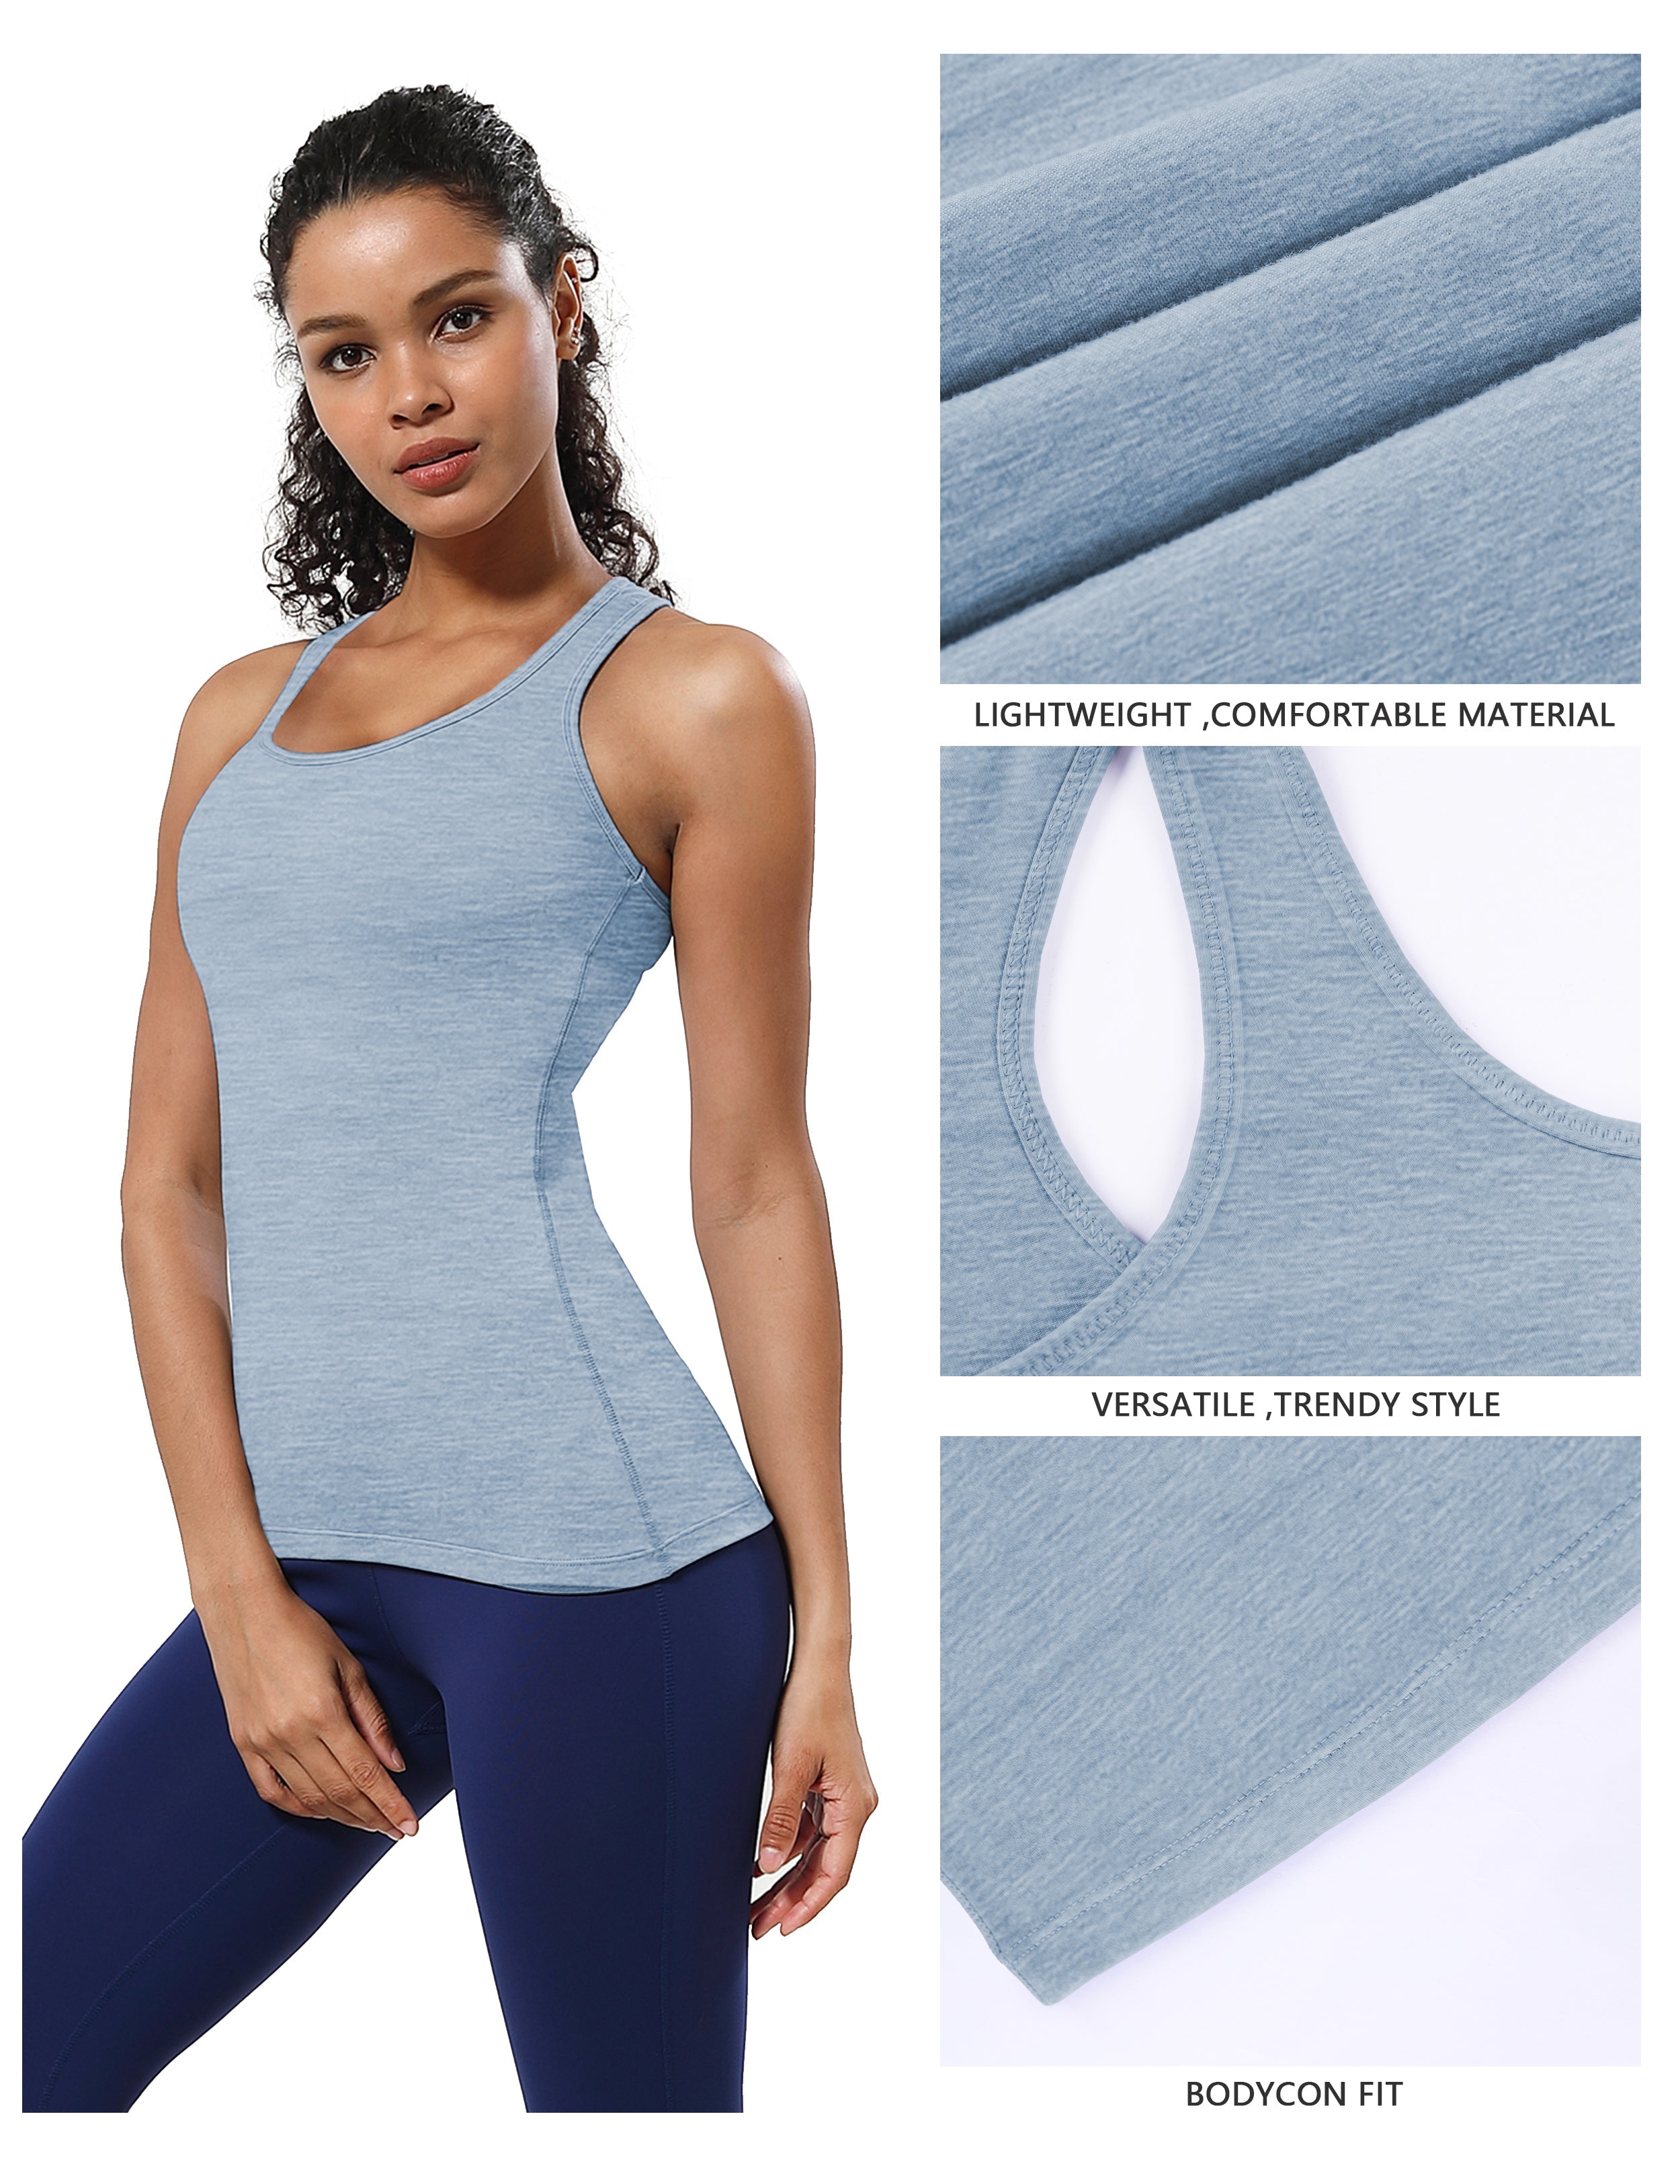 Racerback Athletic Tank Tops heatherblue 92%Nylon/8%Spandex(Cotton Soft) Designed for Jogging Tight Fit So buttery soft, it feels weightless Sweat-wicking Four-way stretch Breathable Contours your body Sits below the waistband for moderate, everyday coverage